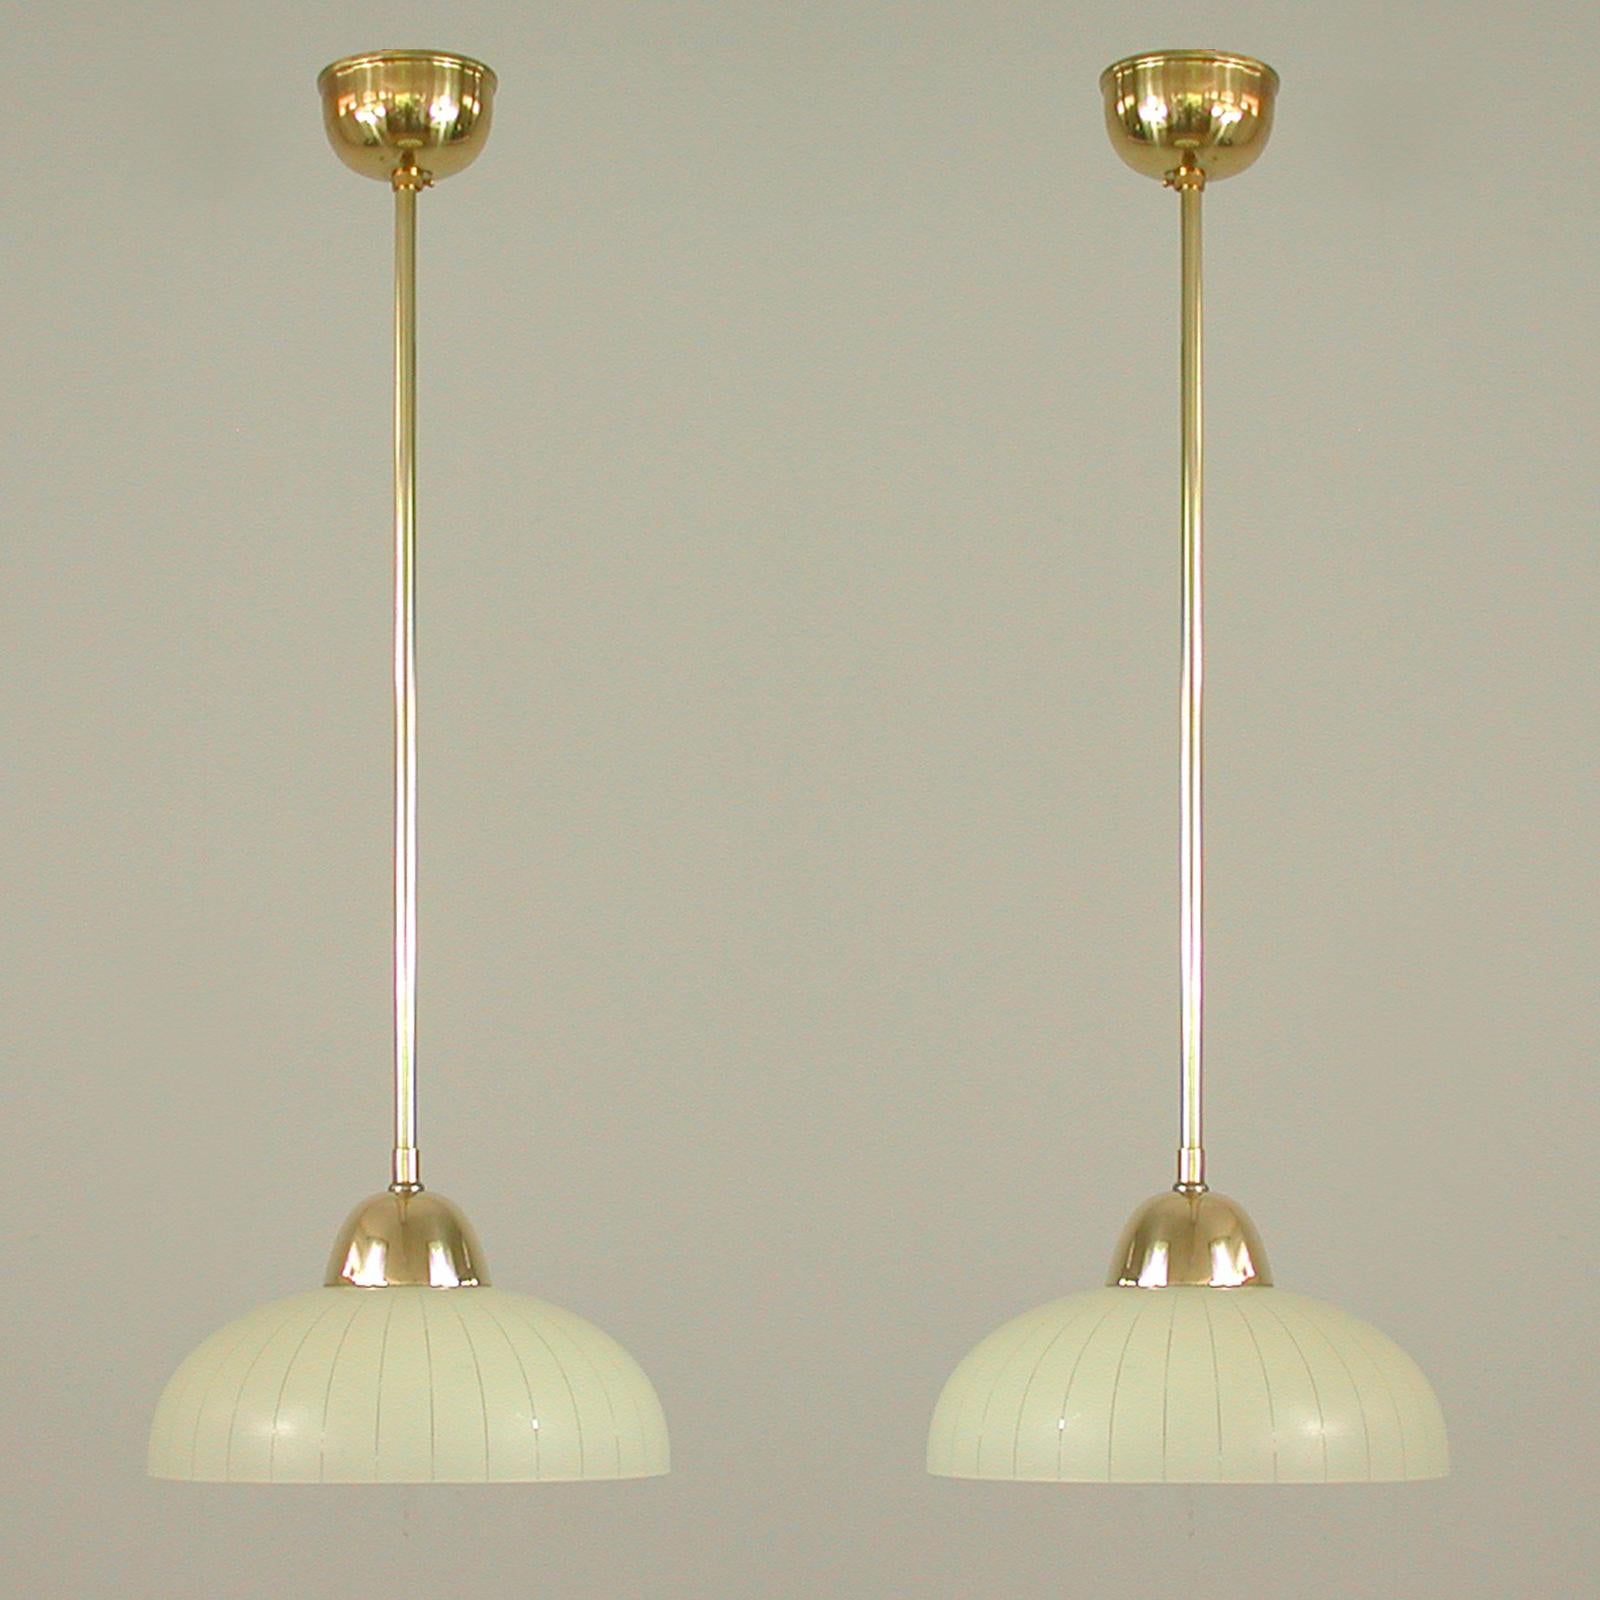 These elegant minimalist pendants were designed and manufactured in Sweden in the 1940s to 1950s. 

The lights feature a round cream colored striped glass lampshade and brass hardware. They requires one E27 bulb and have been rewired for use in US